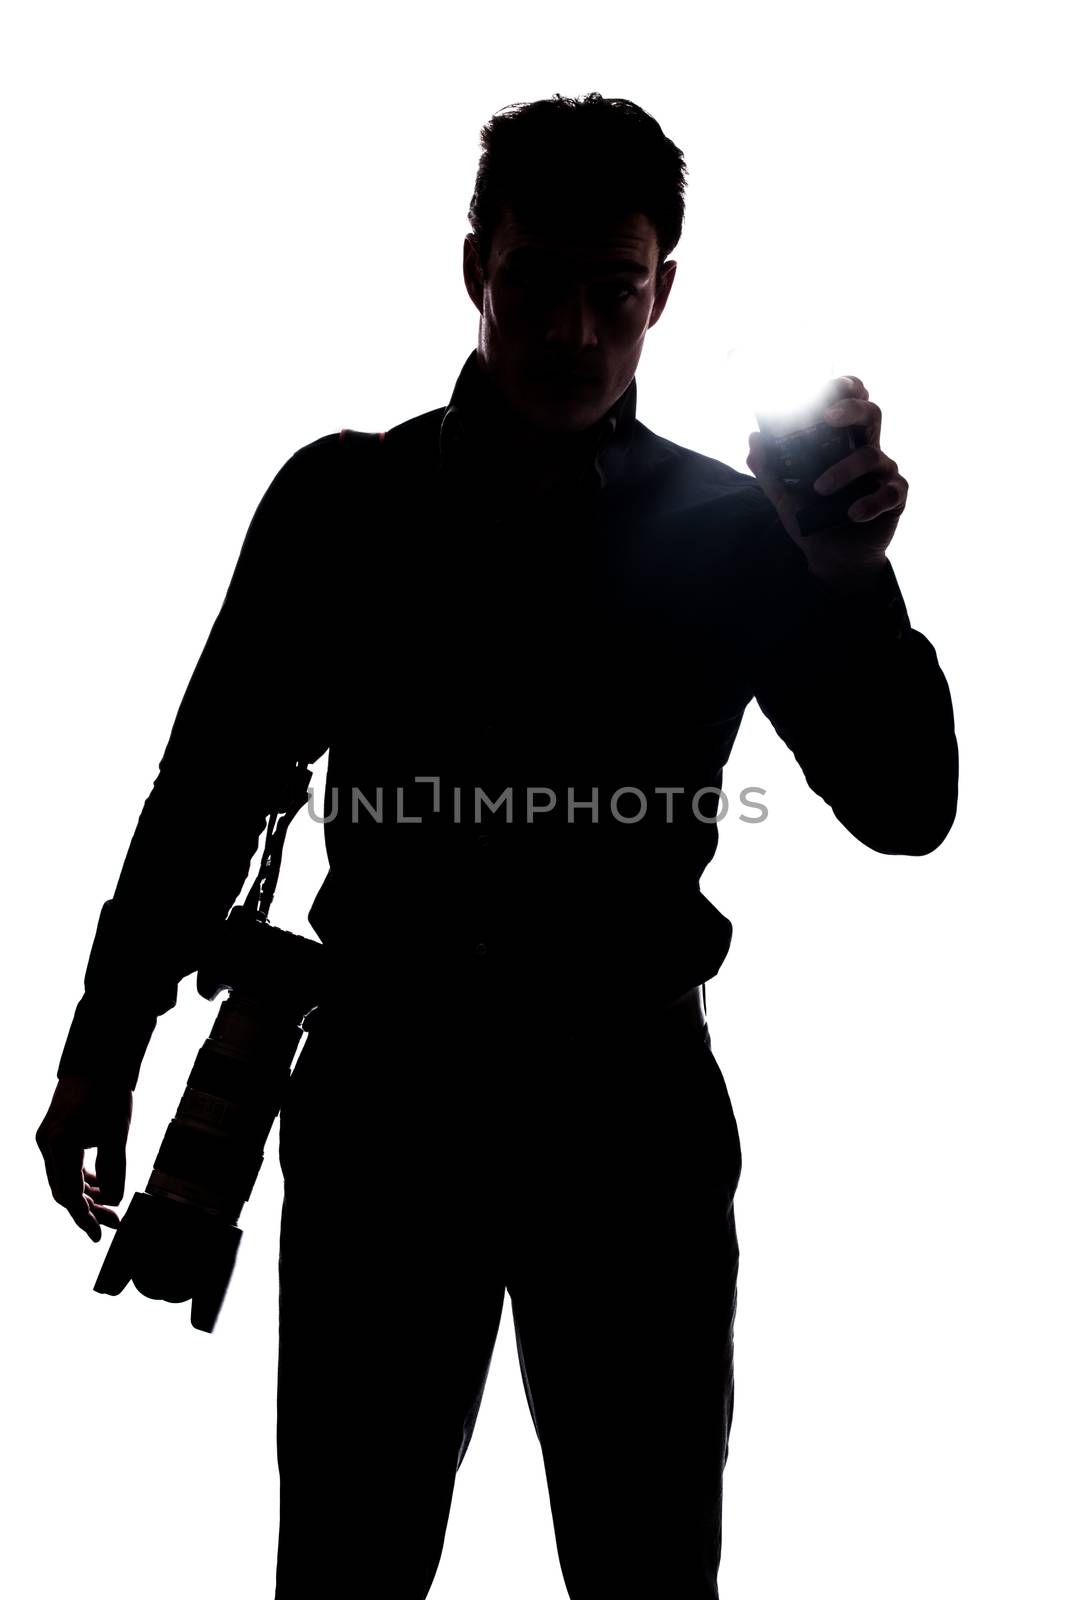 Photographer flashing at the camera in silhouette isolated over white background